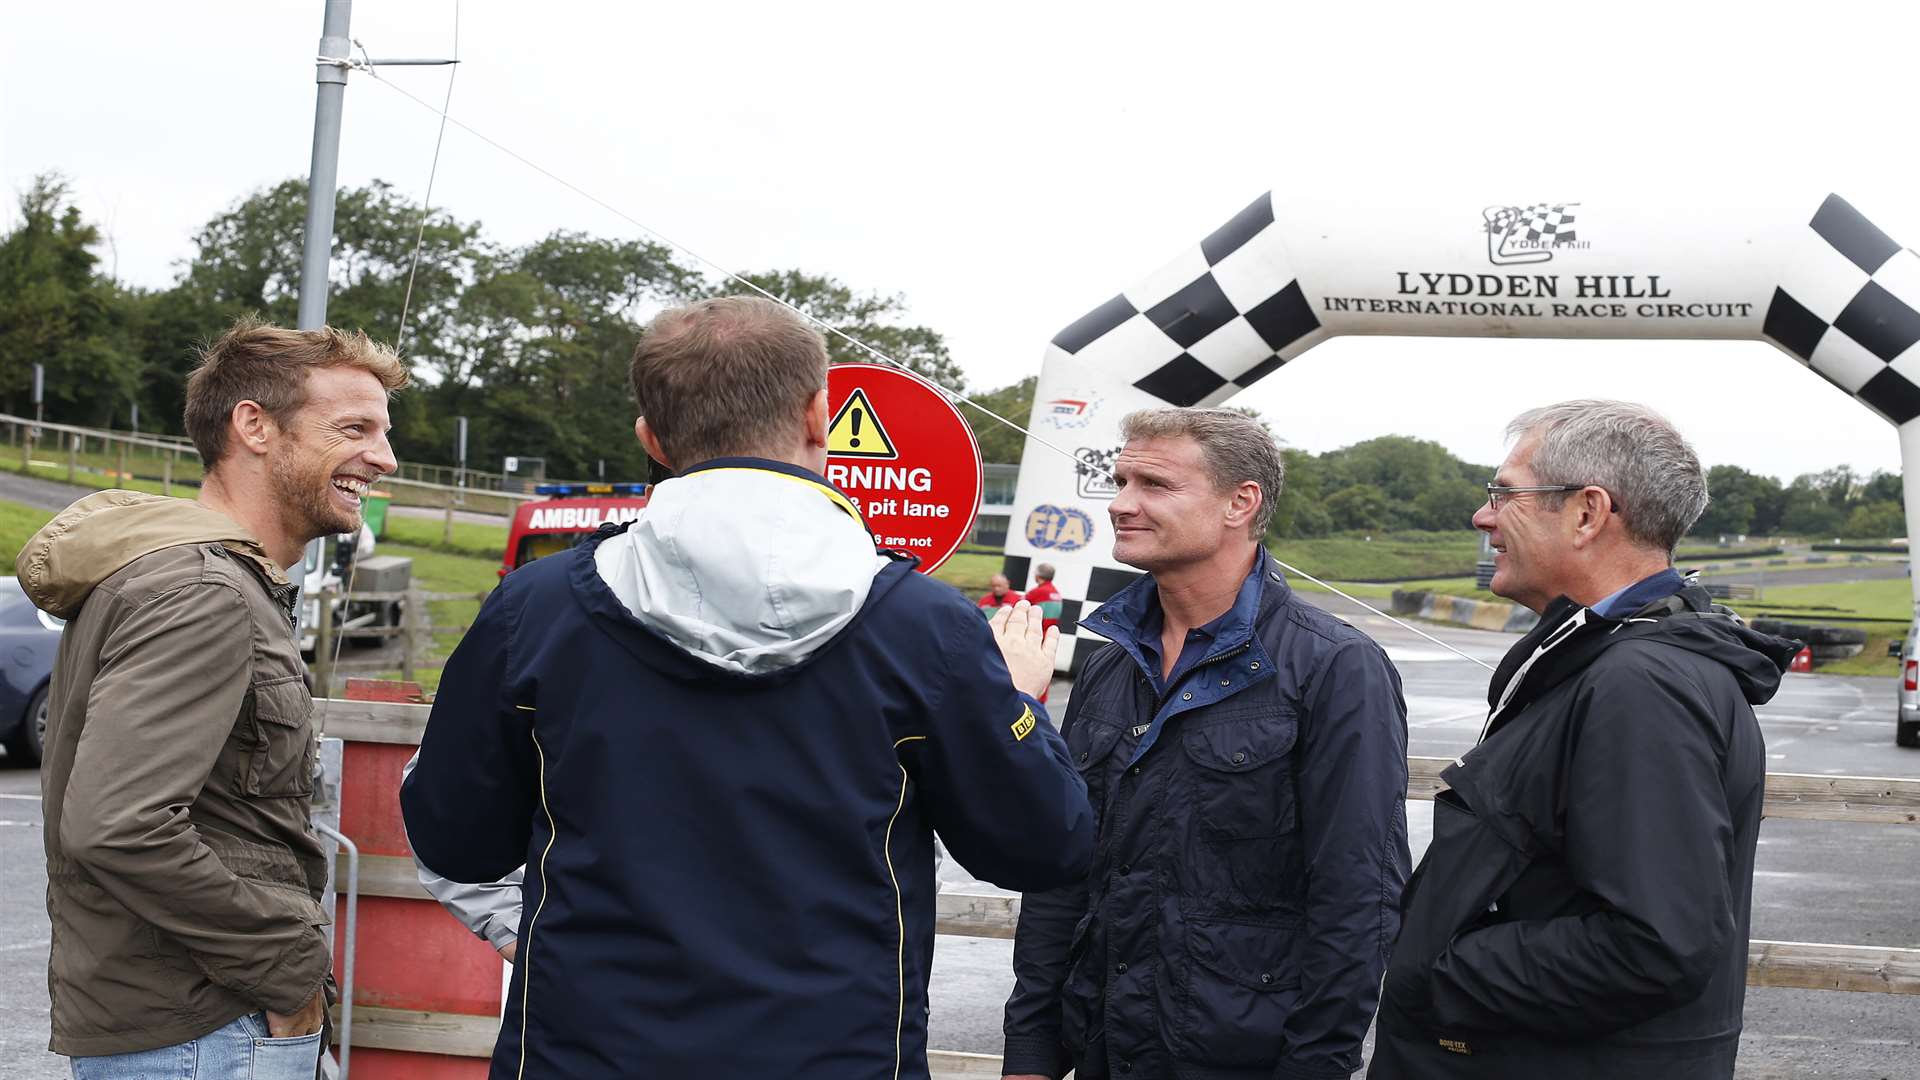 Jenson Button and David Coulthard filming at Lydden